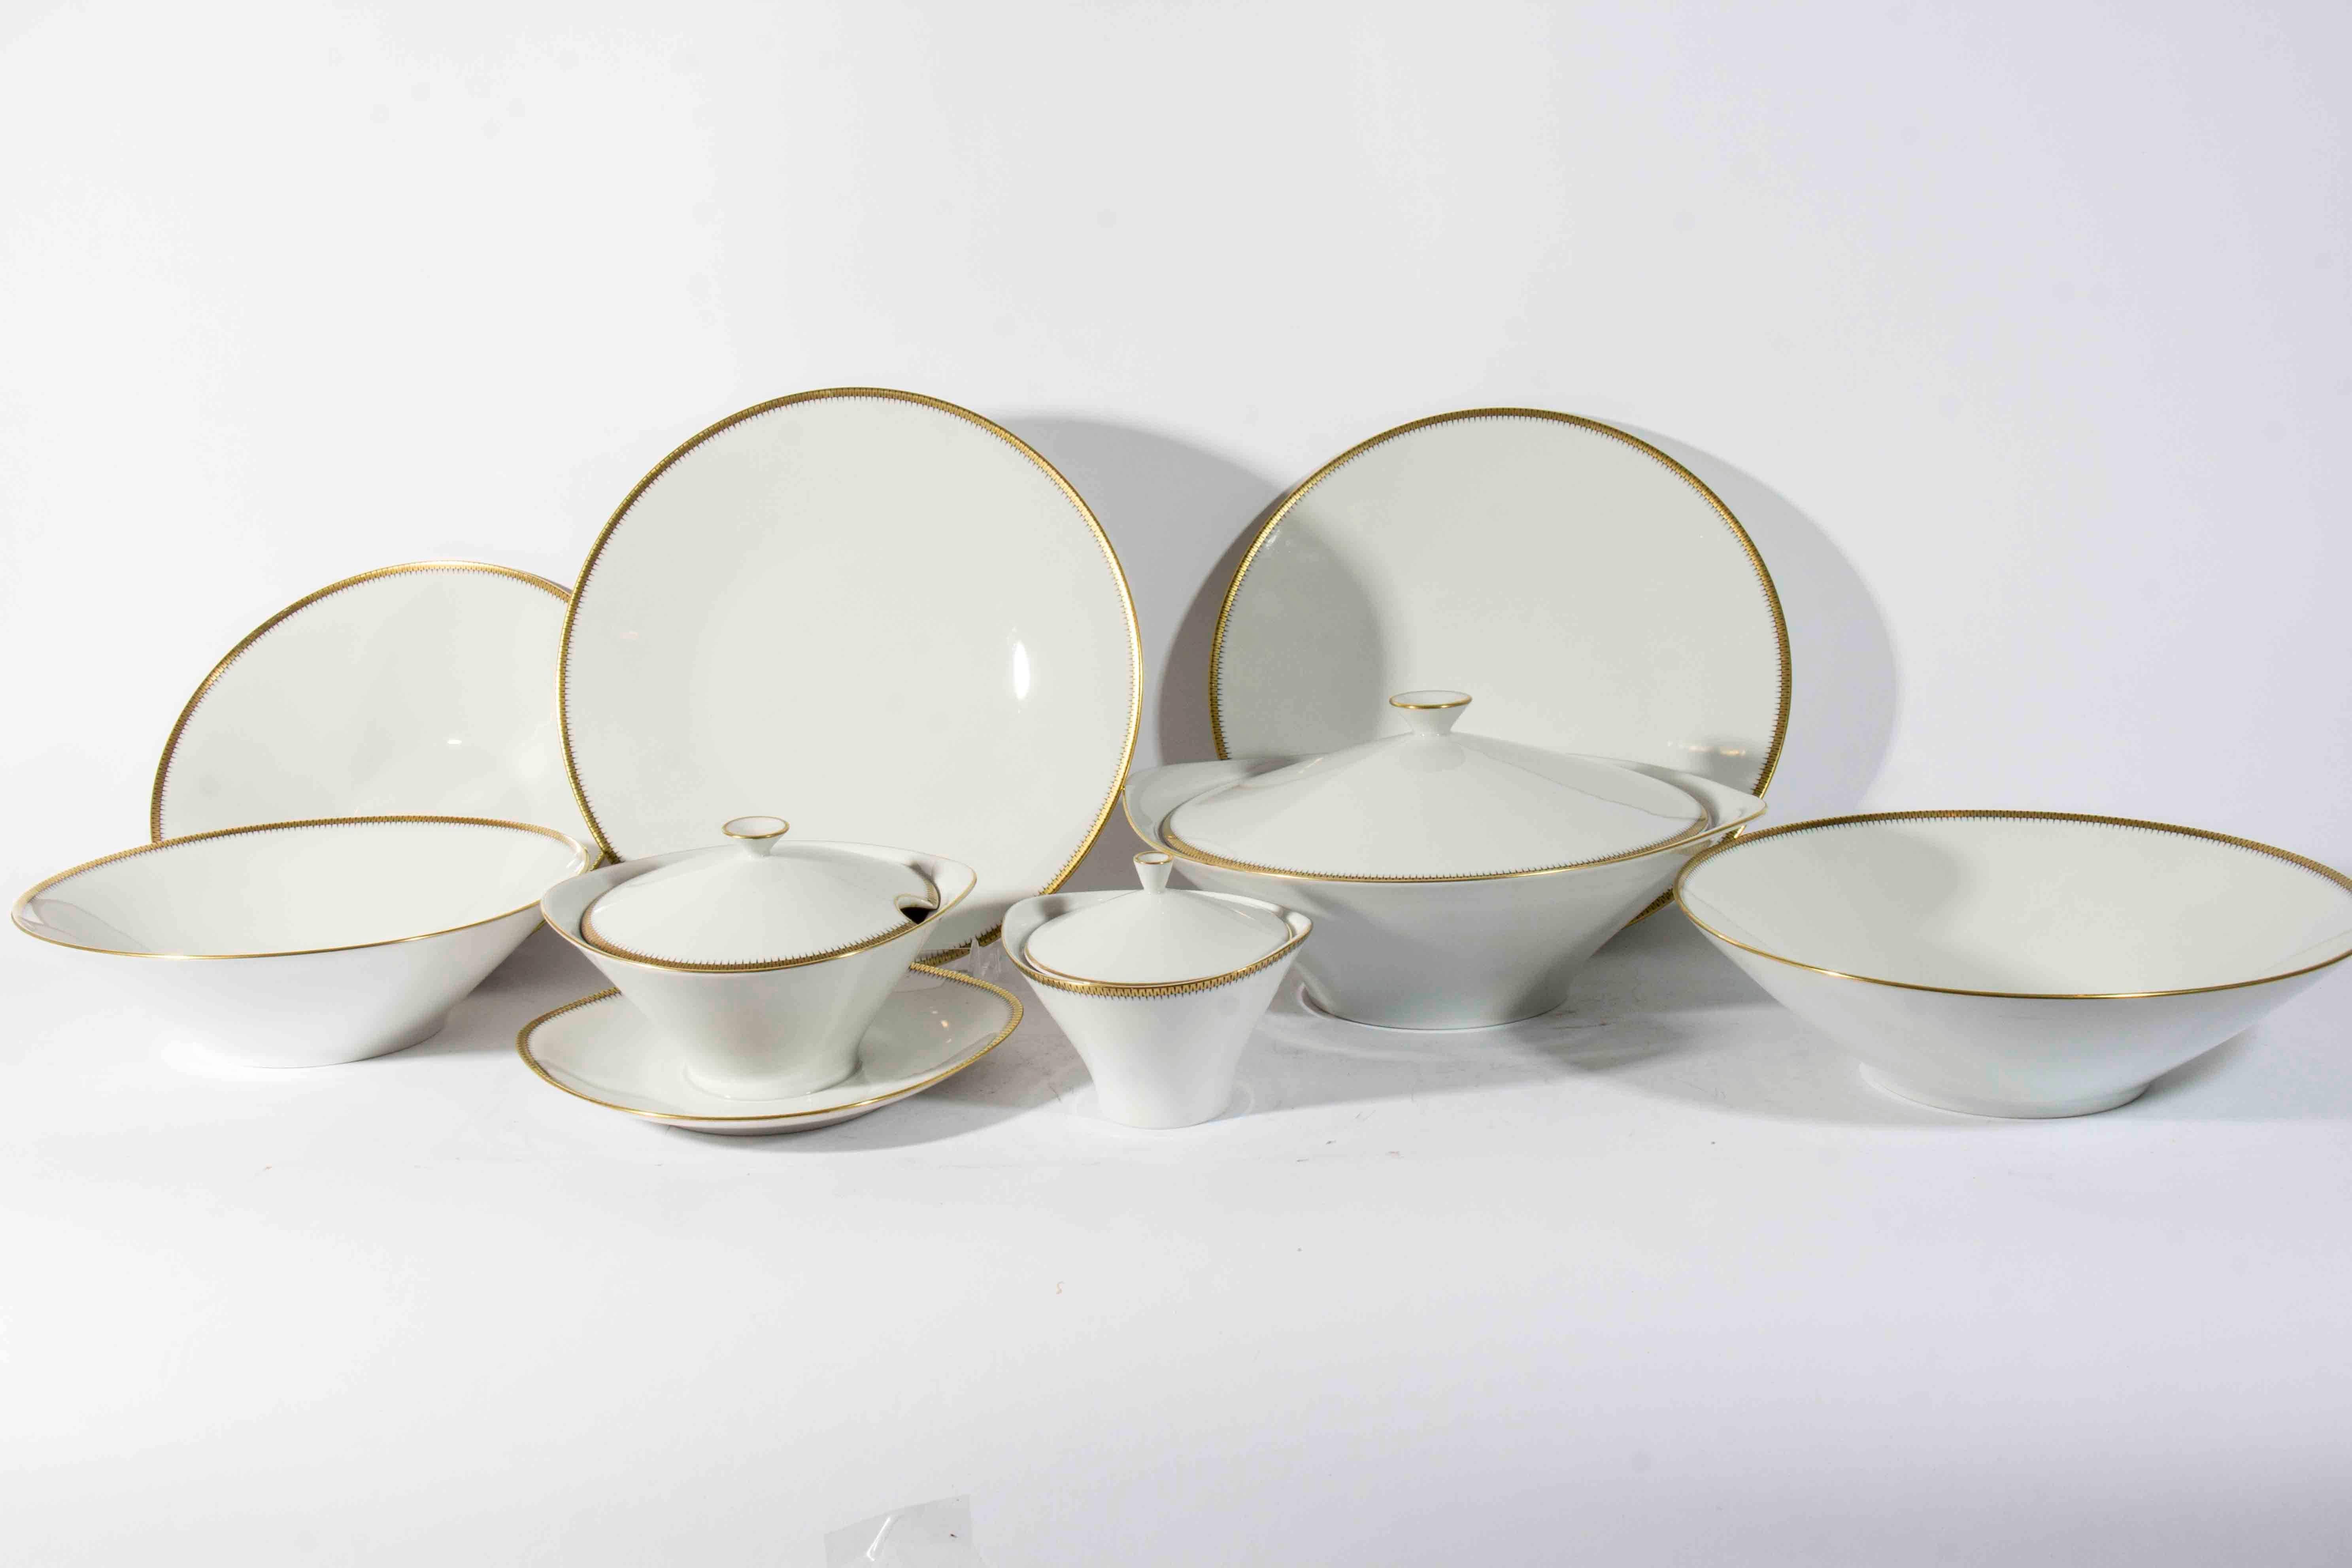 Vintage Bavarian dinnerware service for 12 with extras and serve ware. White porcelain with gold detail on rim. All pieces in excellent condition. 

Includes:

12 dinner plates
12 salad plates
12 bread and butter plates
12 desert plates
12